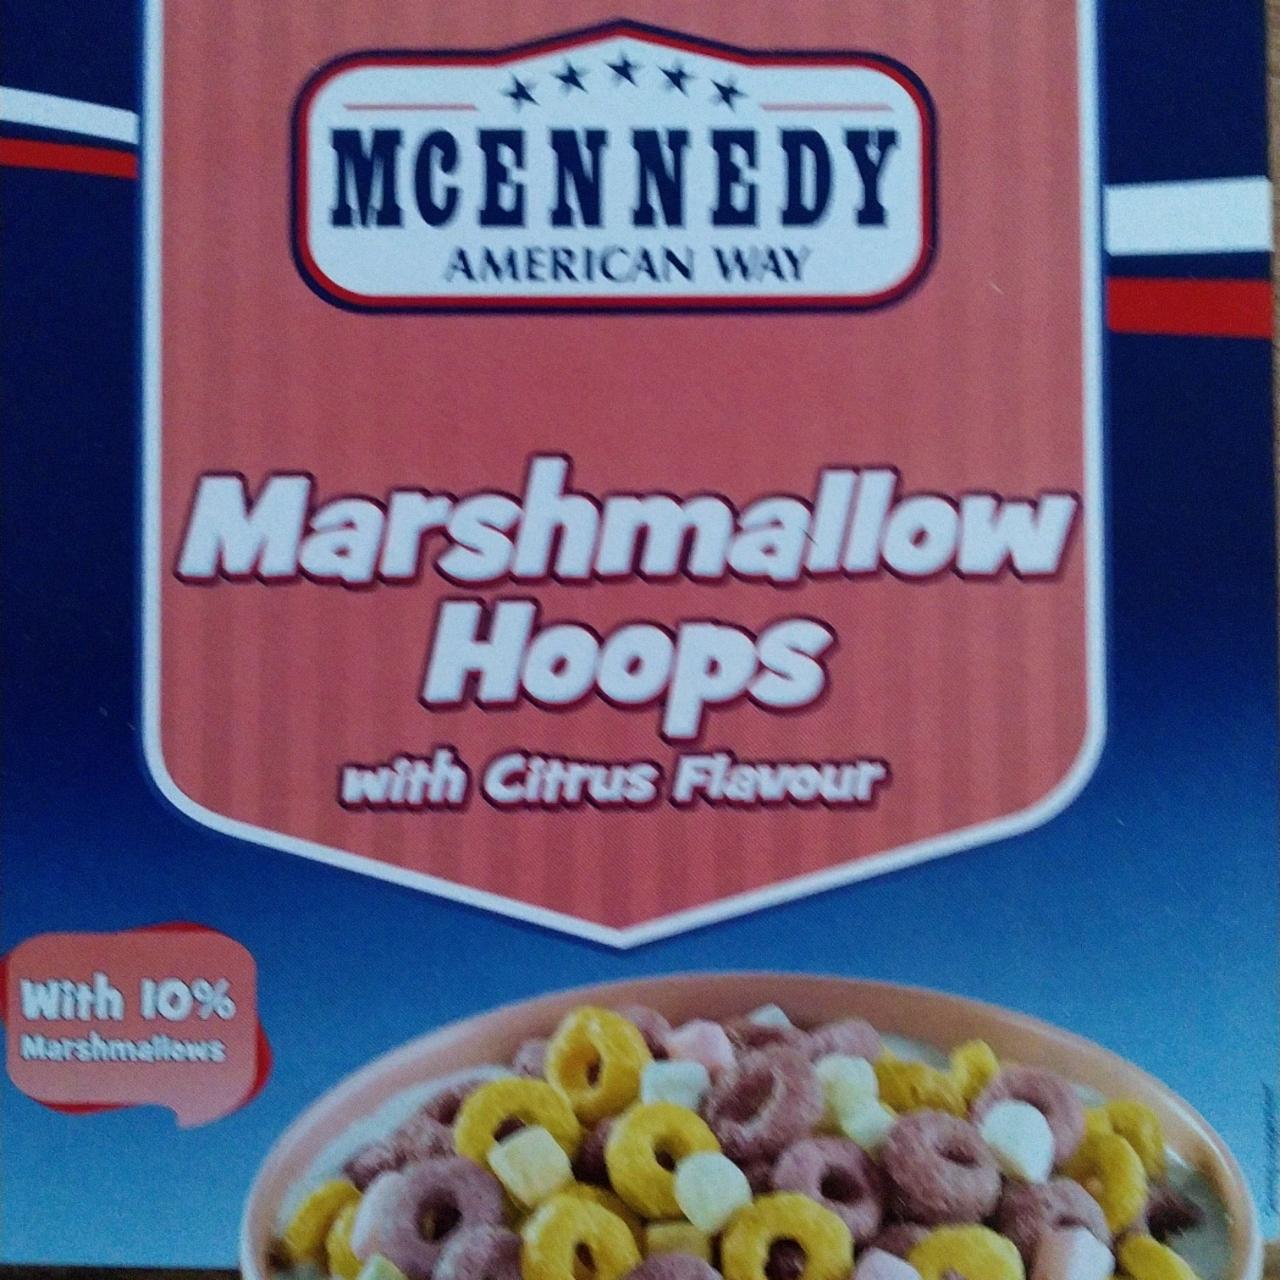 Фото - Marshmallow Hoops with Citrus Flavour McEnnedy American Way